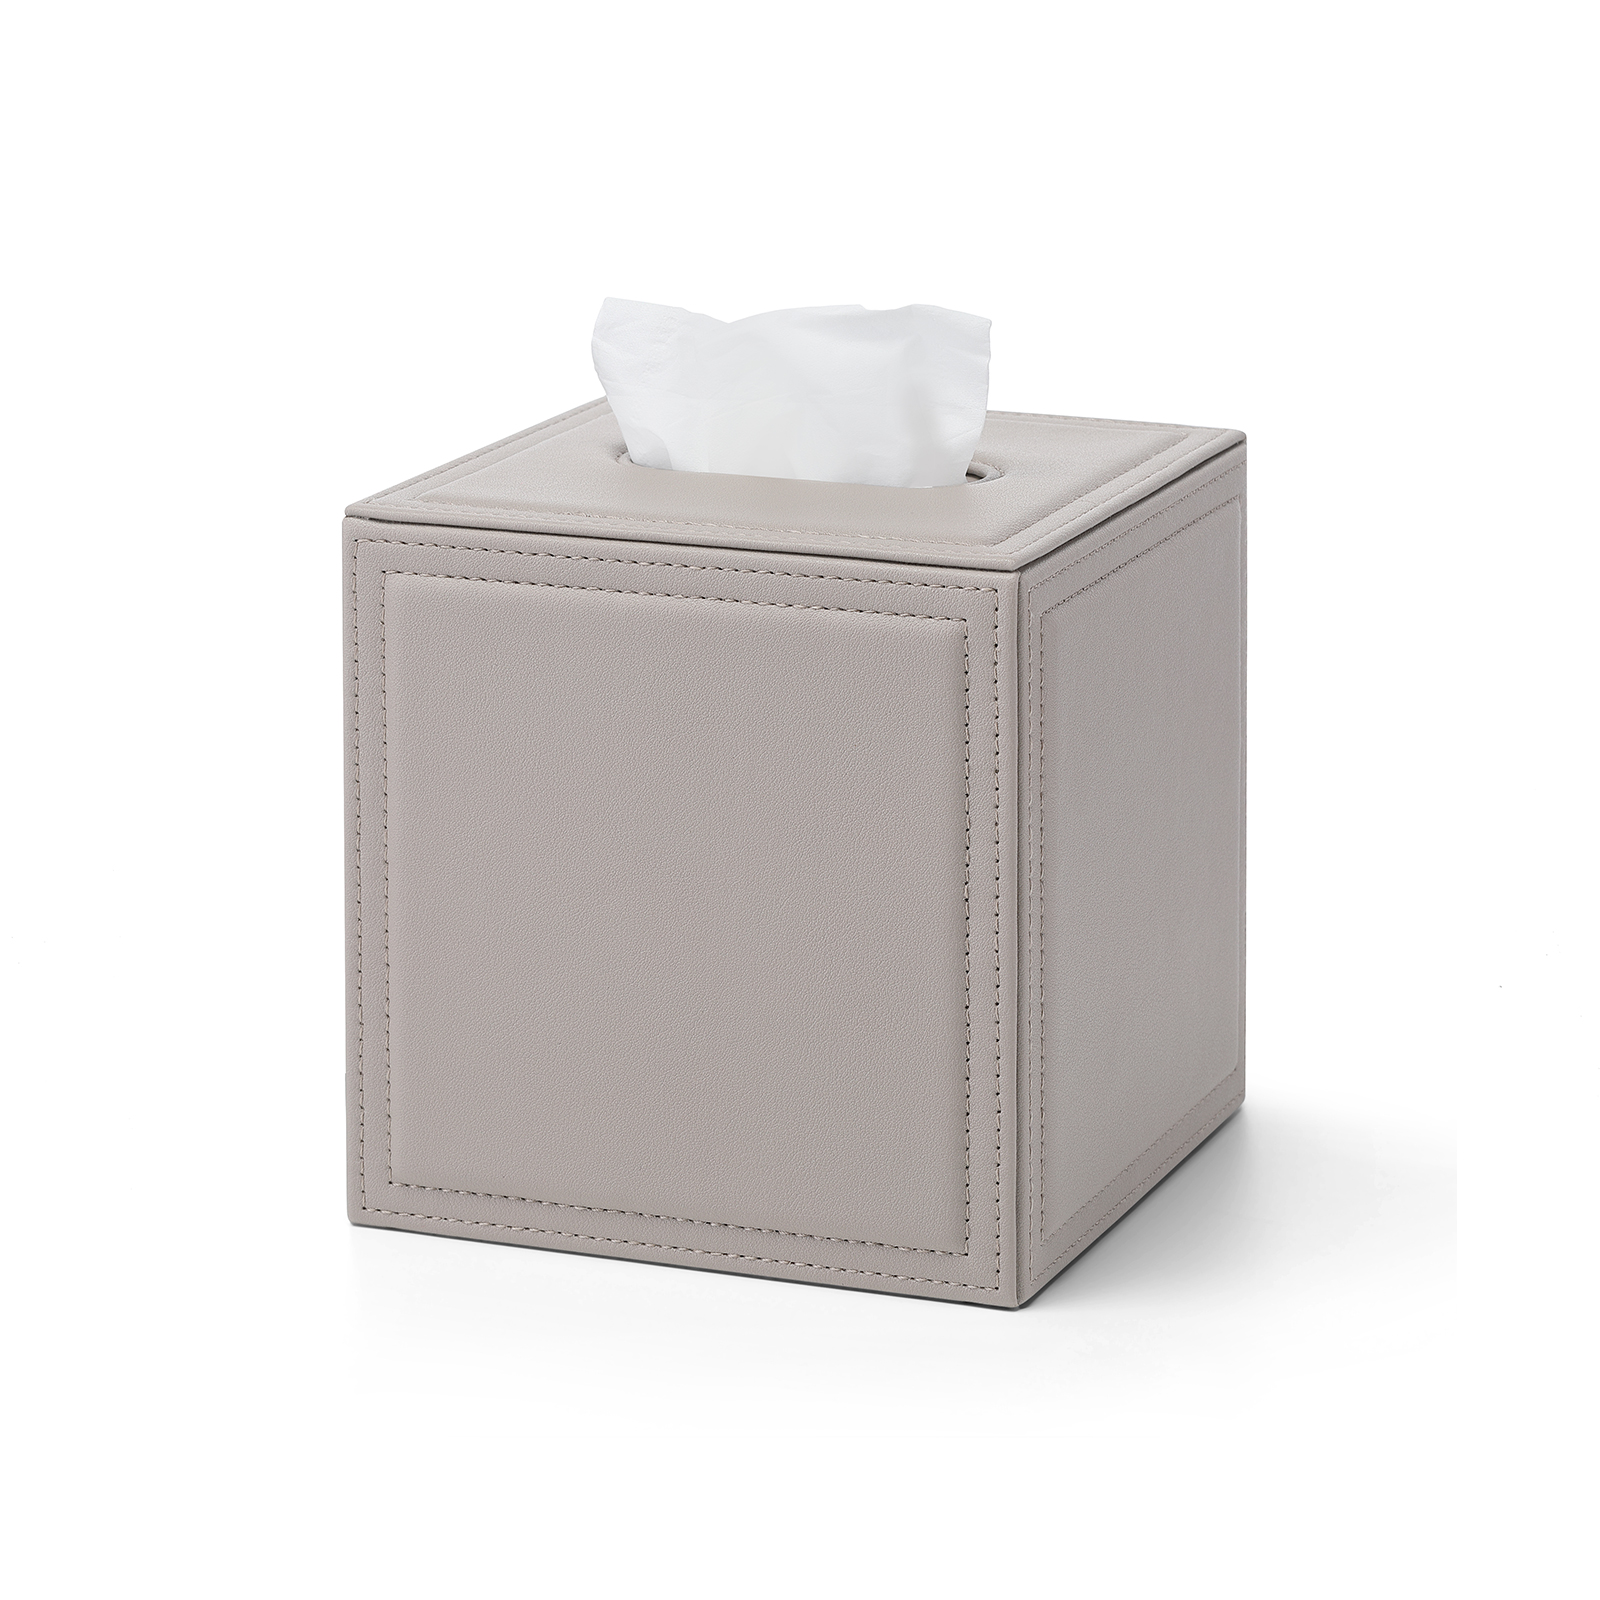  Cat Paw Prints Tissue Box Cover PVC Leather Aesthetic  Decorative Tissue Paper Holder Soft Durable Square for Toilet Dining Room  Living Room Size 5.7×5.7×5.7 inch : Home & Kitchen